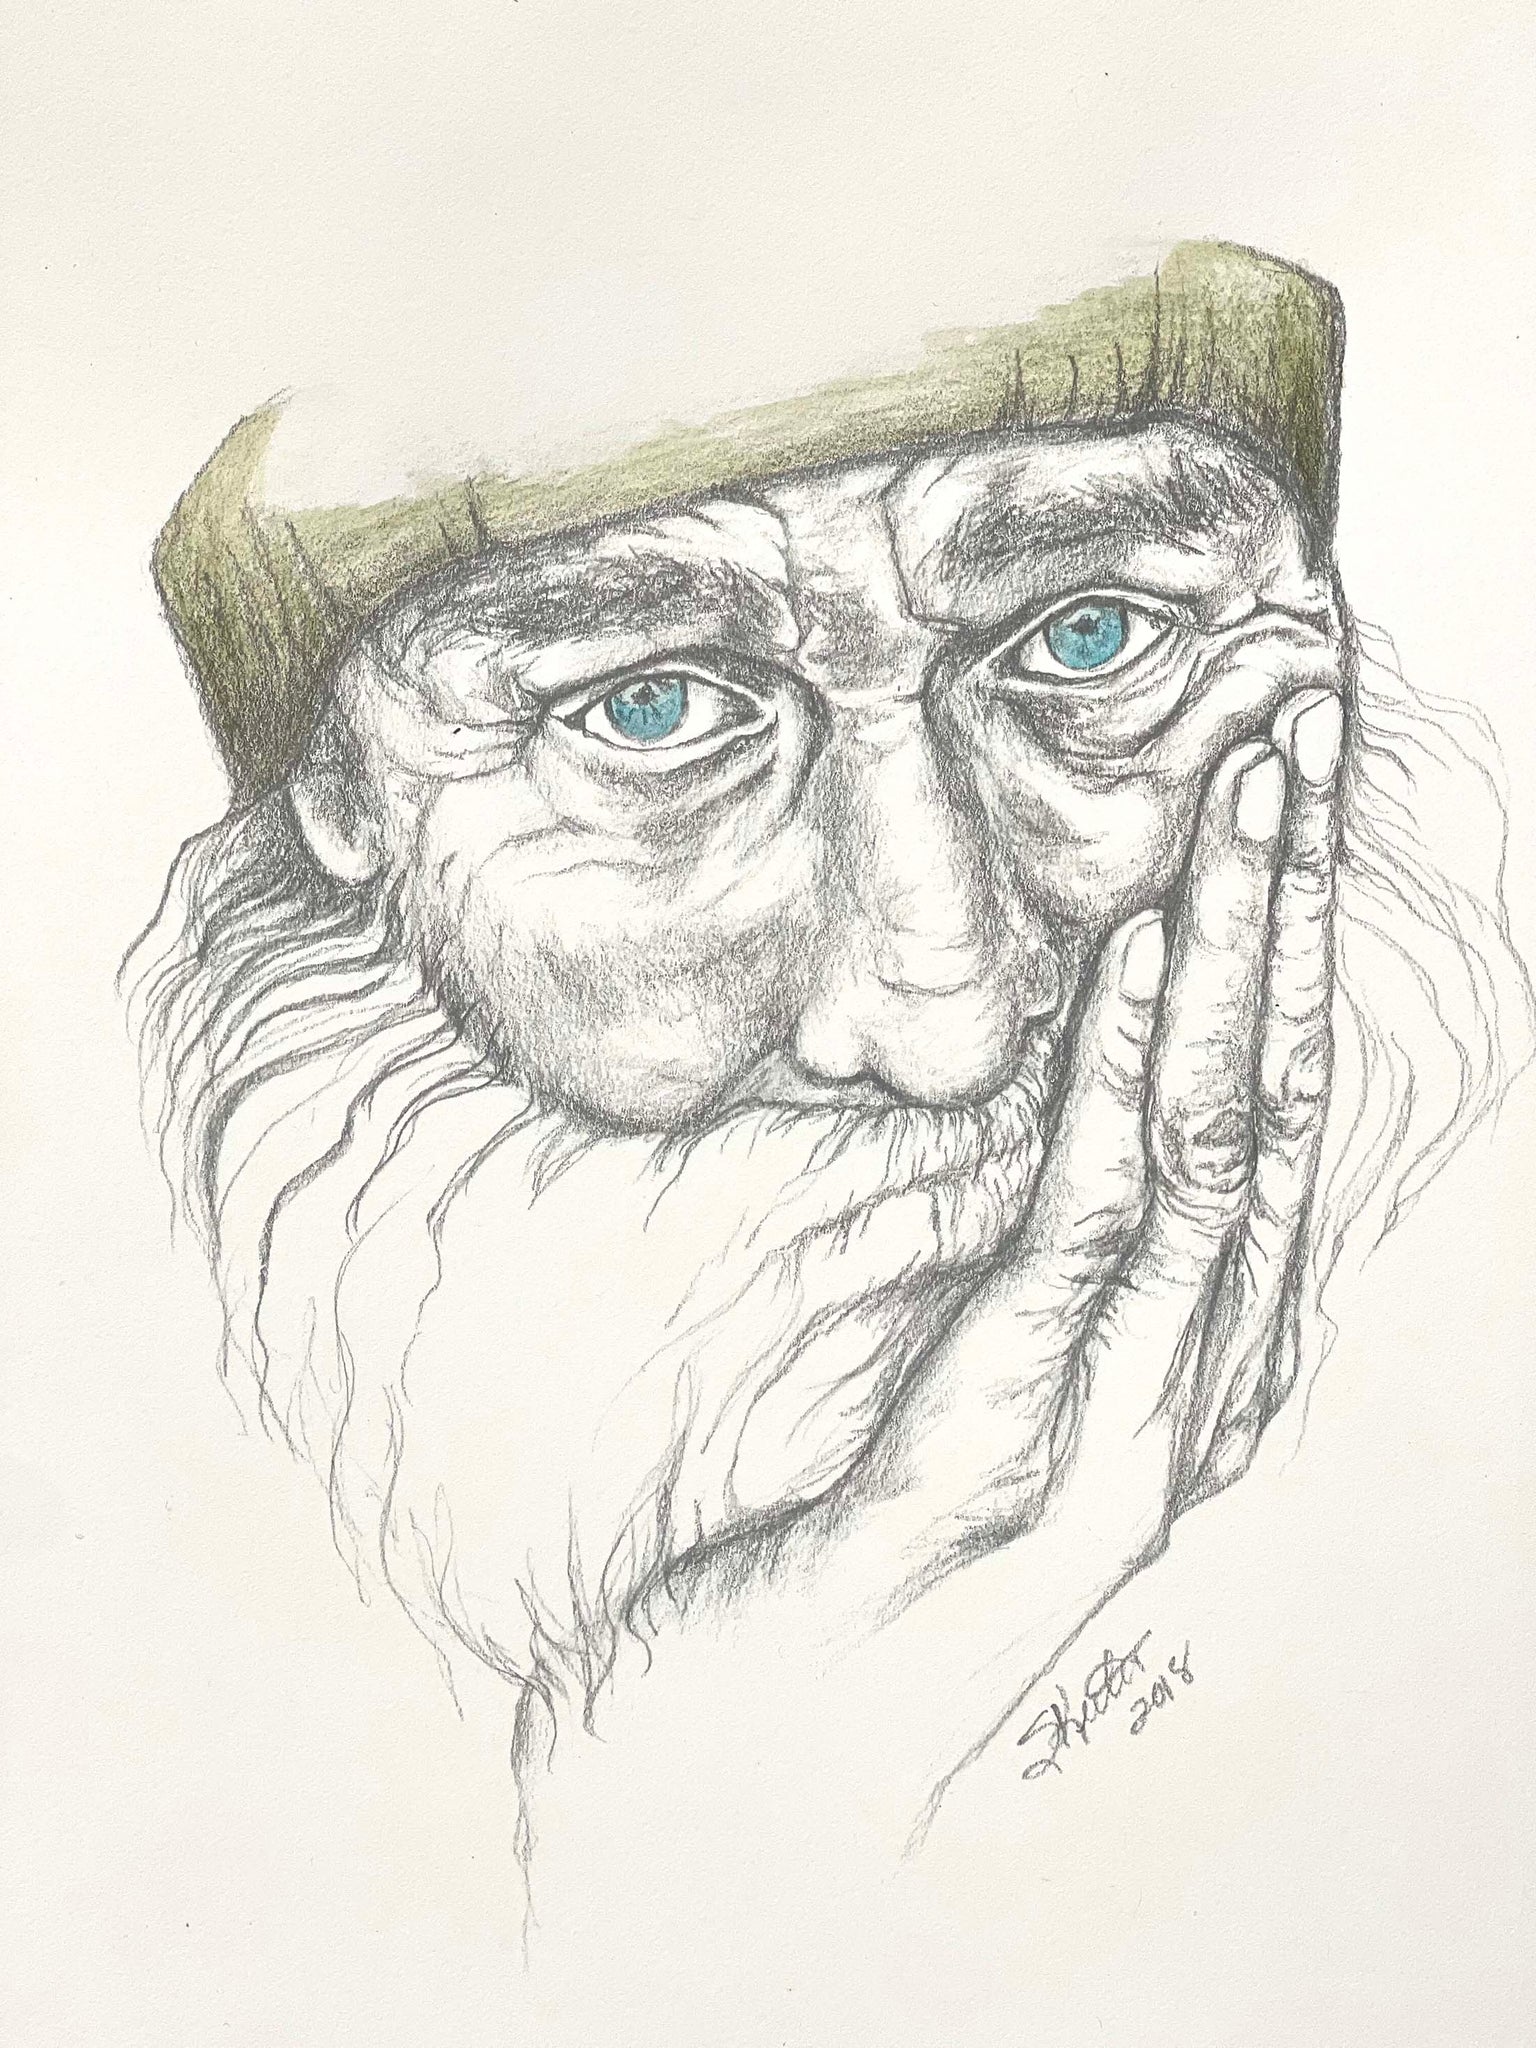 PENCIL PRINT/COLORED PENCIL, OLD MAN WITH WRINKLES AND A STORY